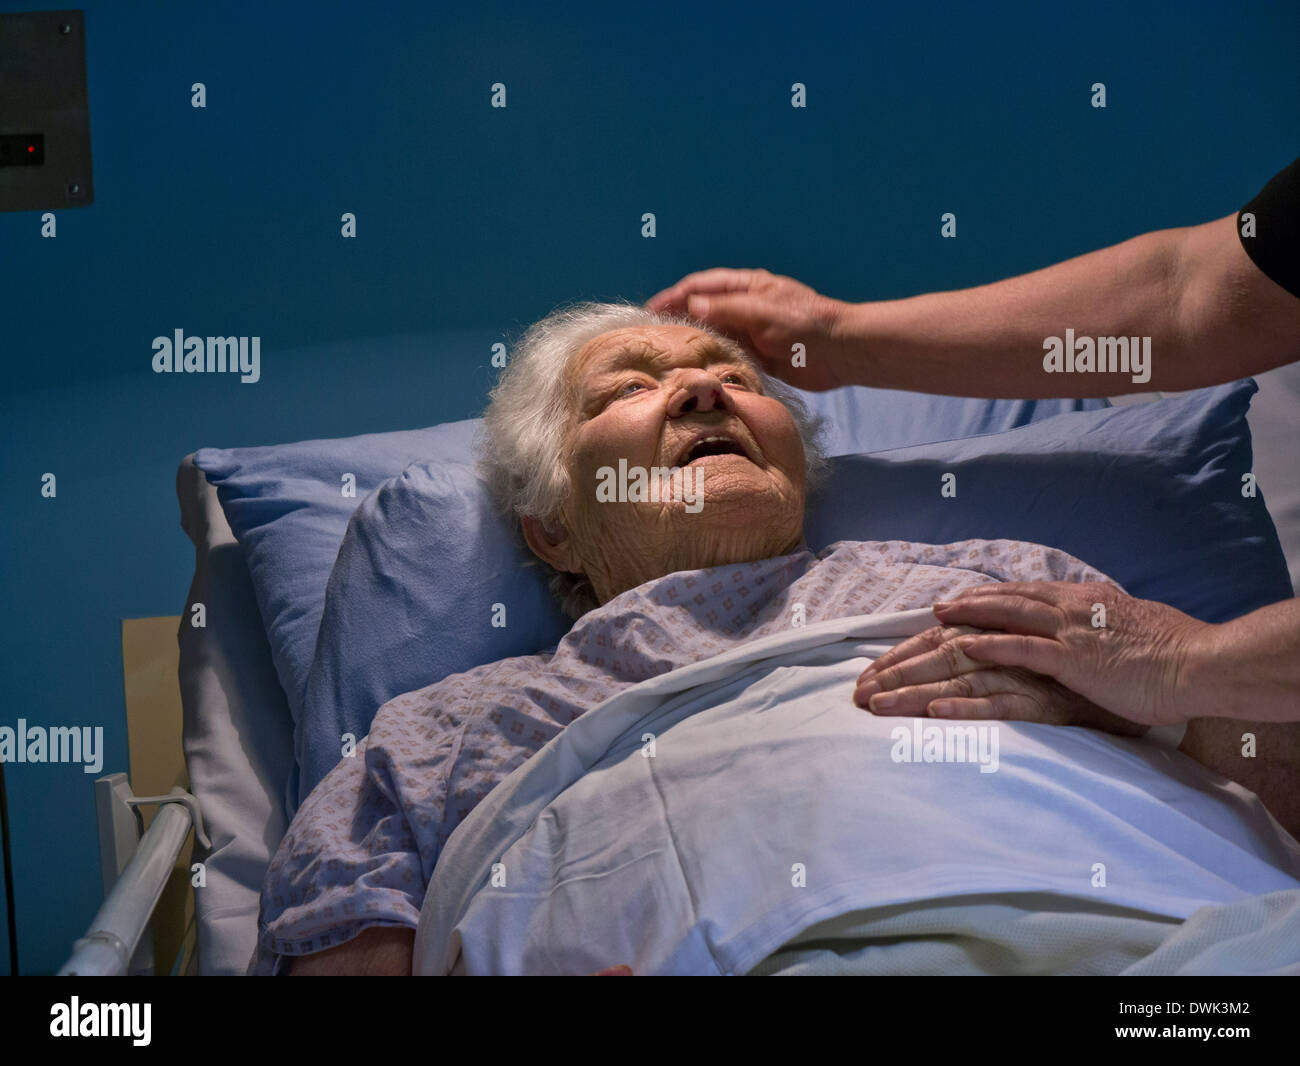 Contented smiling senior old age elderly lady in hospital bed at night with comforting hand of carer nurse Stock Photo